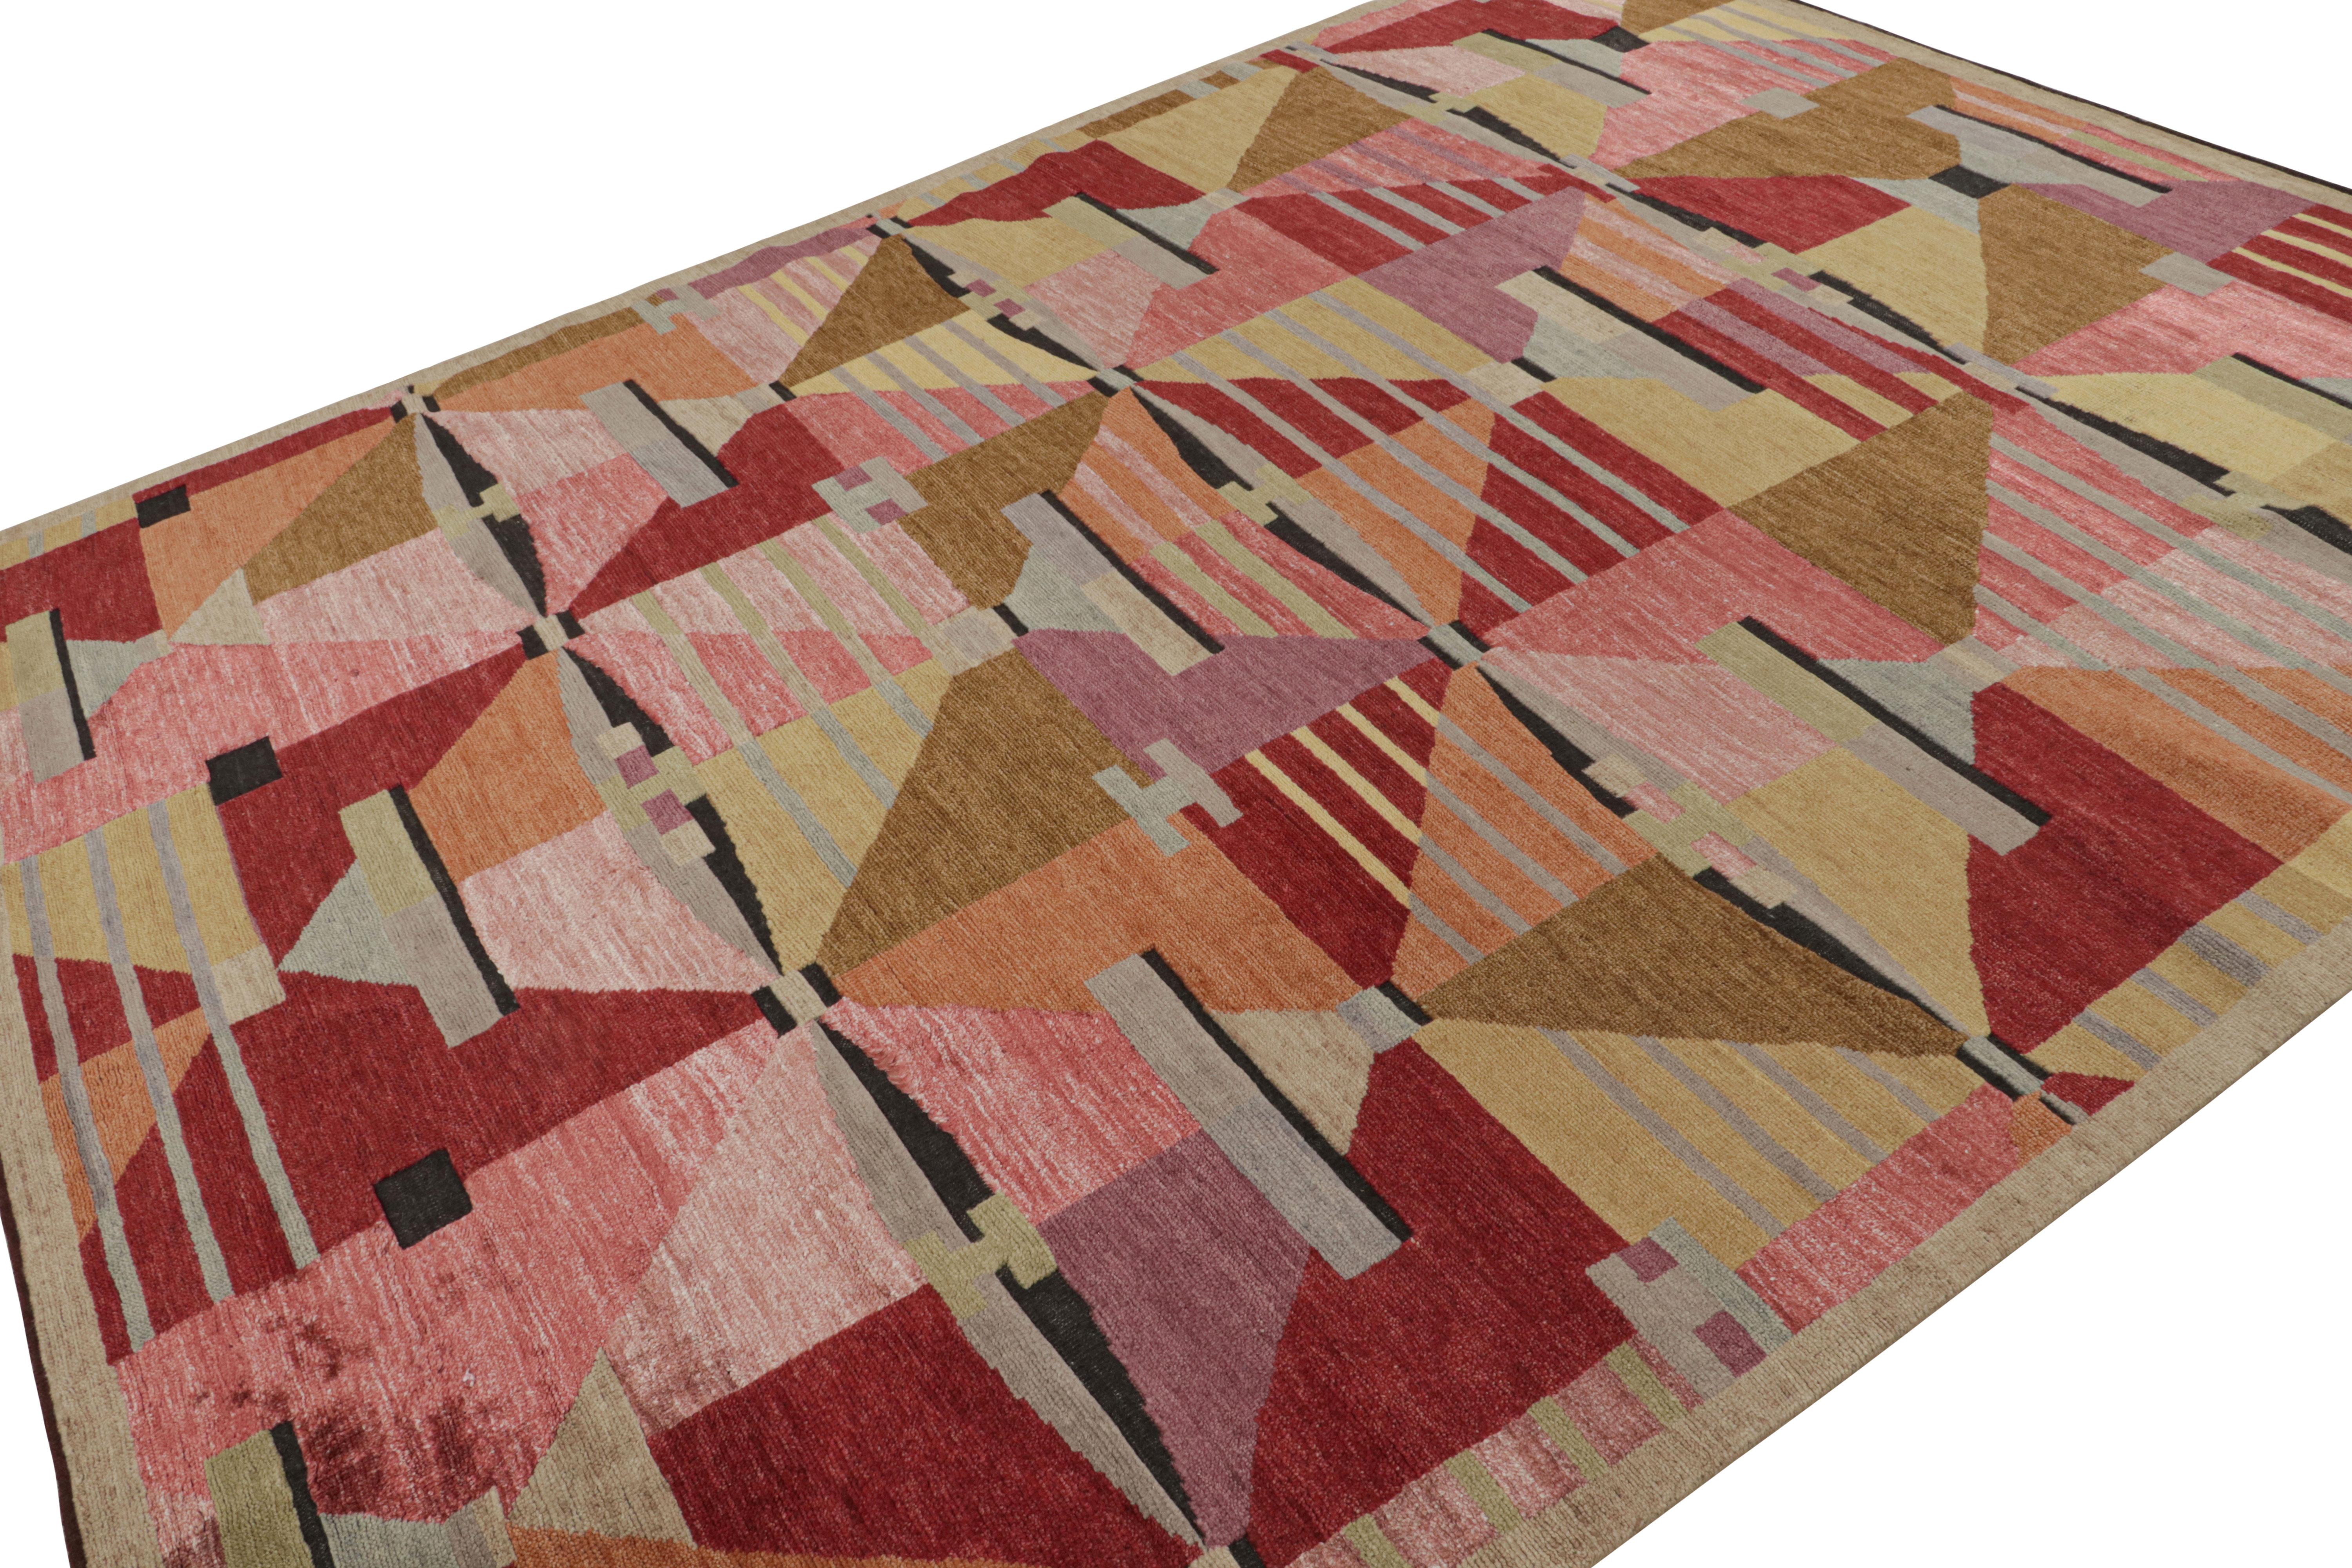 Hand-knotted in wool and sari silk, this 9x12 Scandinavian rug is from our “High” line, named for its high-low texture married to the geometric patterns. 

On the design: 

This alluring rug is a polychromatic piece, favoring warm red and pink